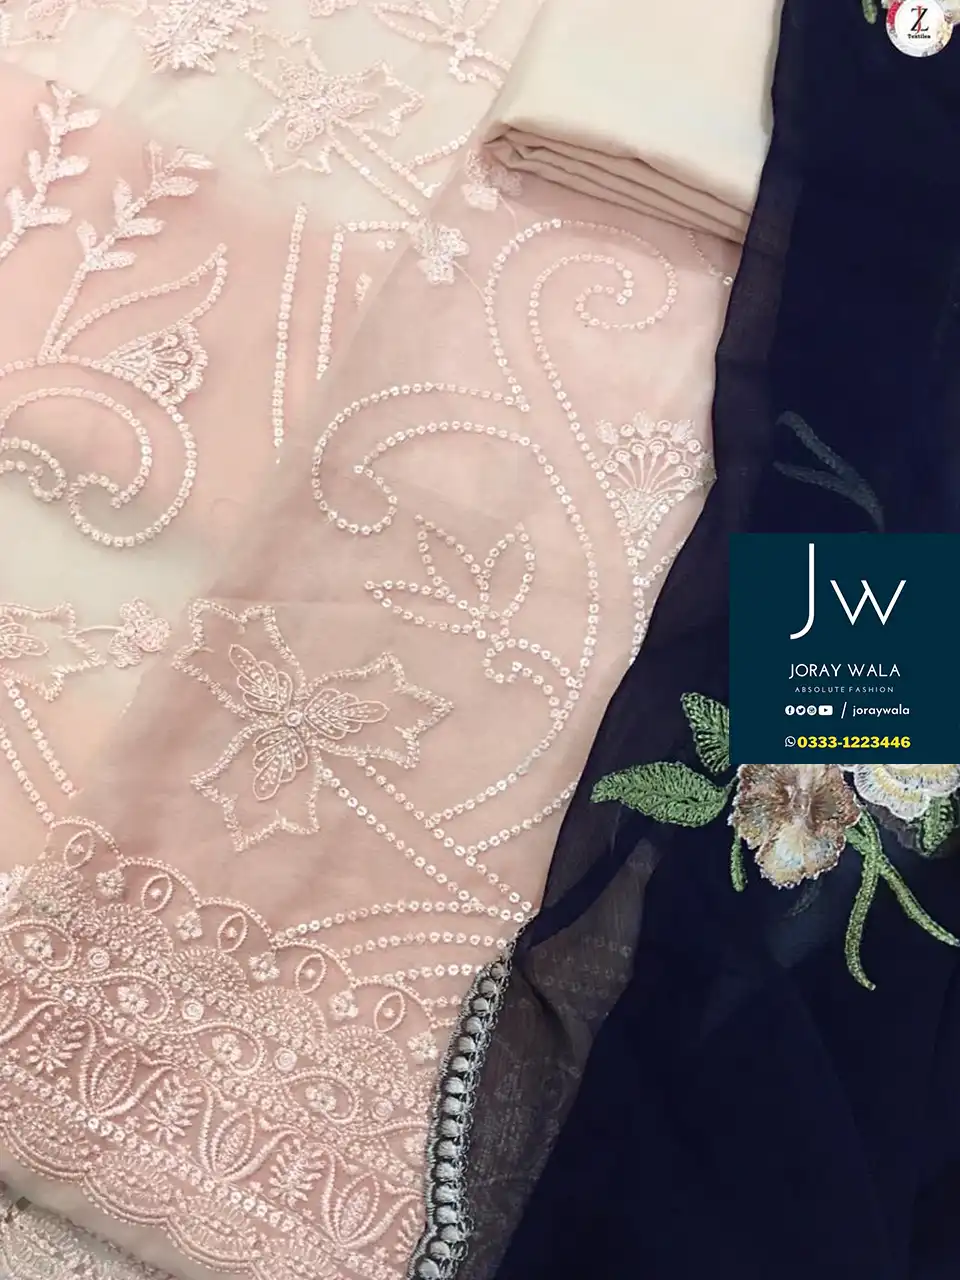 Partywear Fancy 3 pcs suit, beautiful model wearing a embroidered Tea Pink suit, good news for customers that this suit is availbale at joraywala with free DC